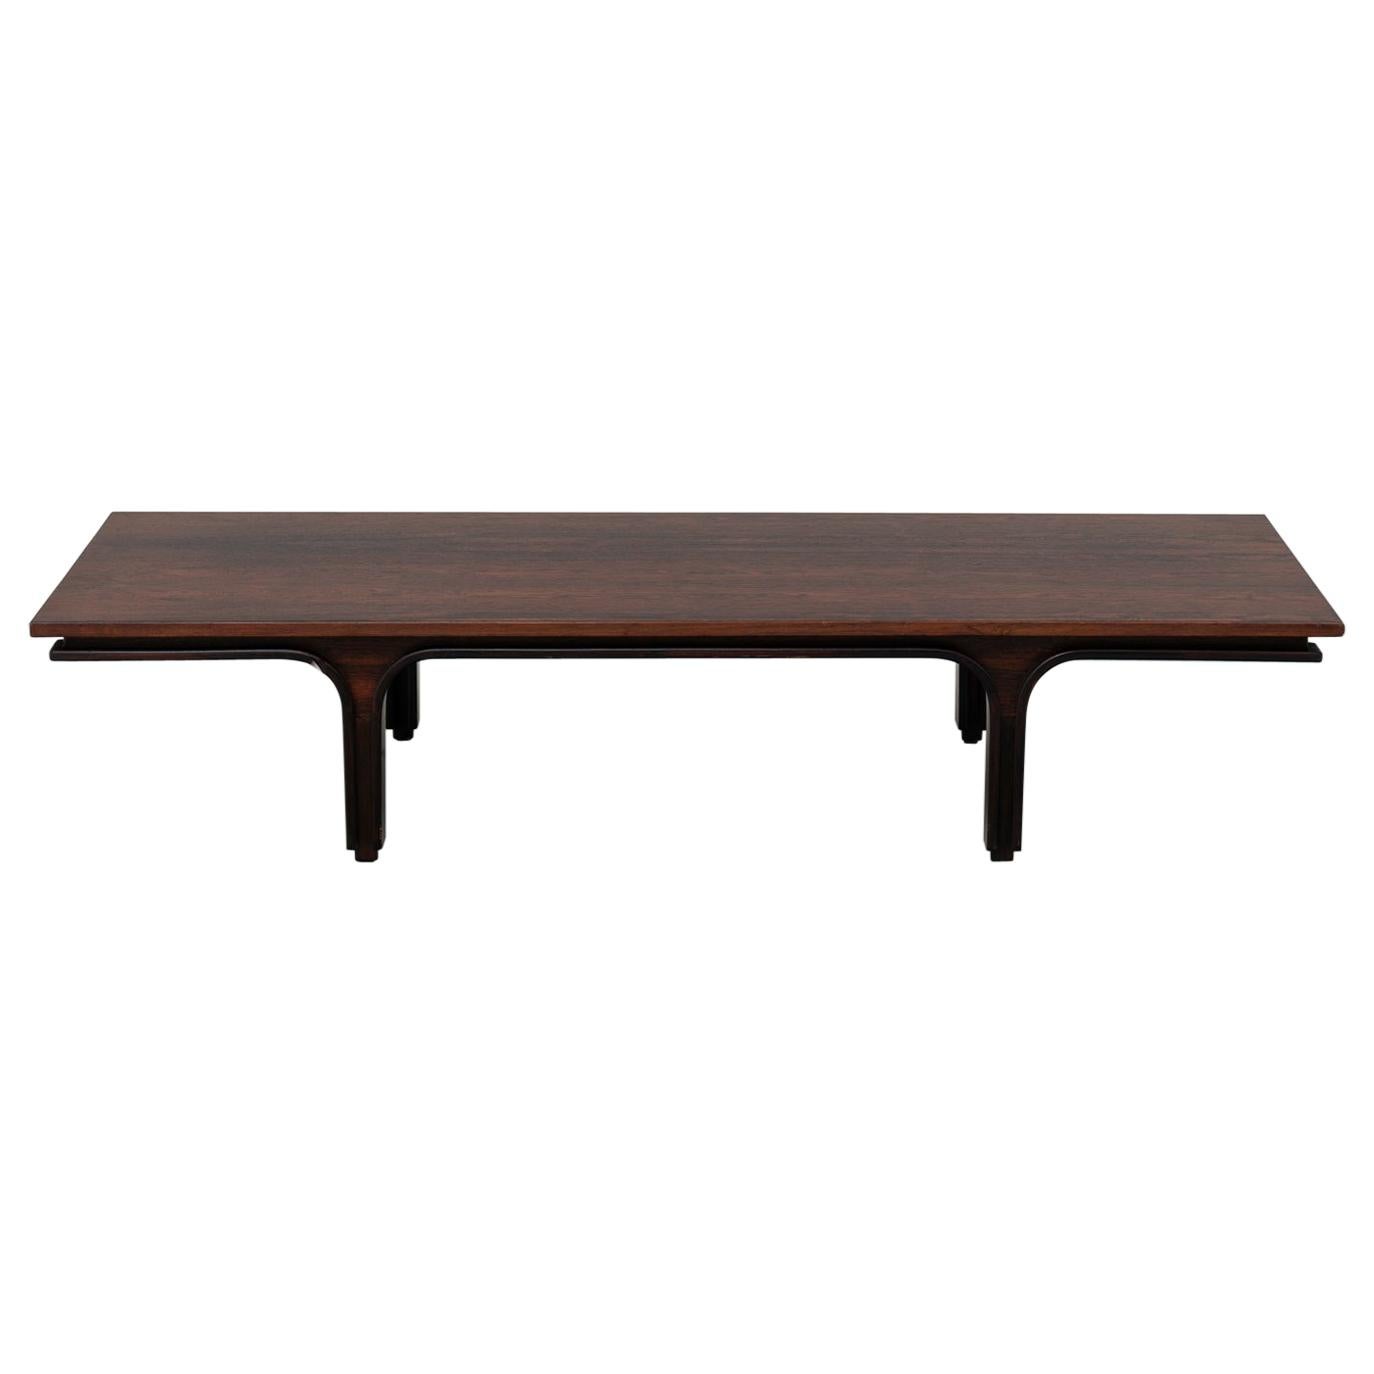 Gianfranco Frattini Midcentury Mod 514 Large Rosewood Low Table for Bernini 1956 For Sale